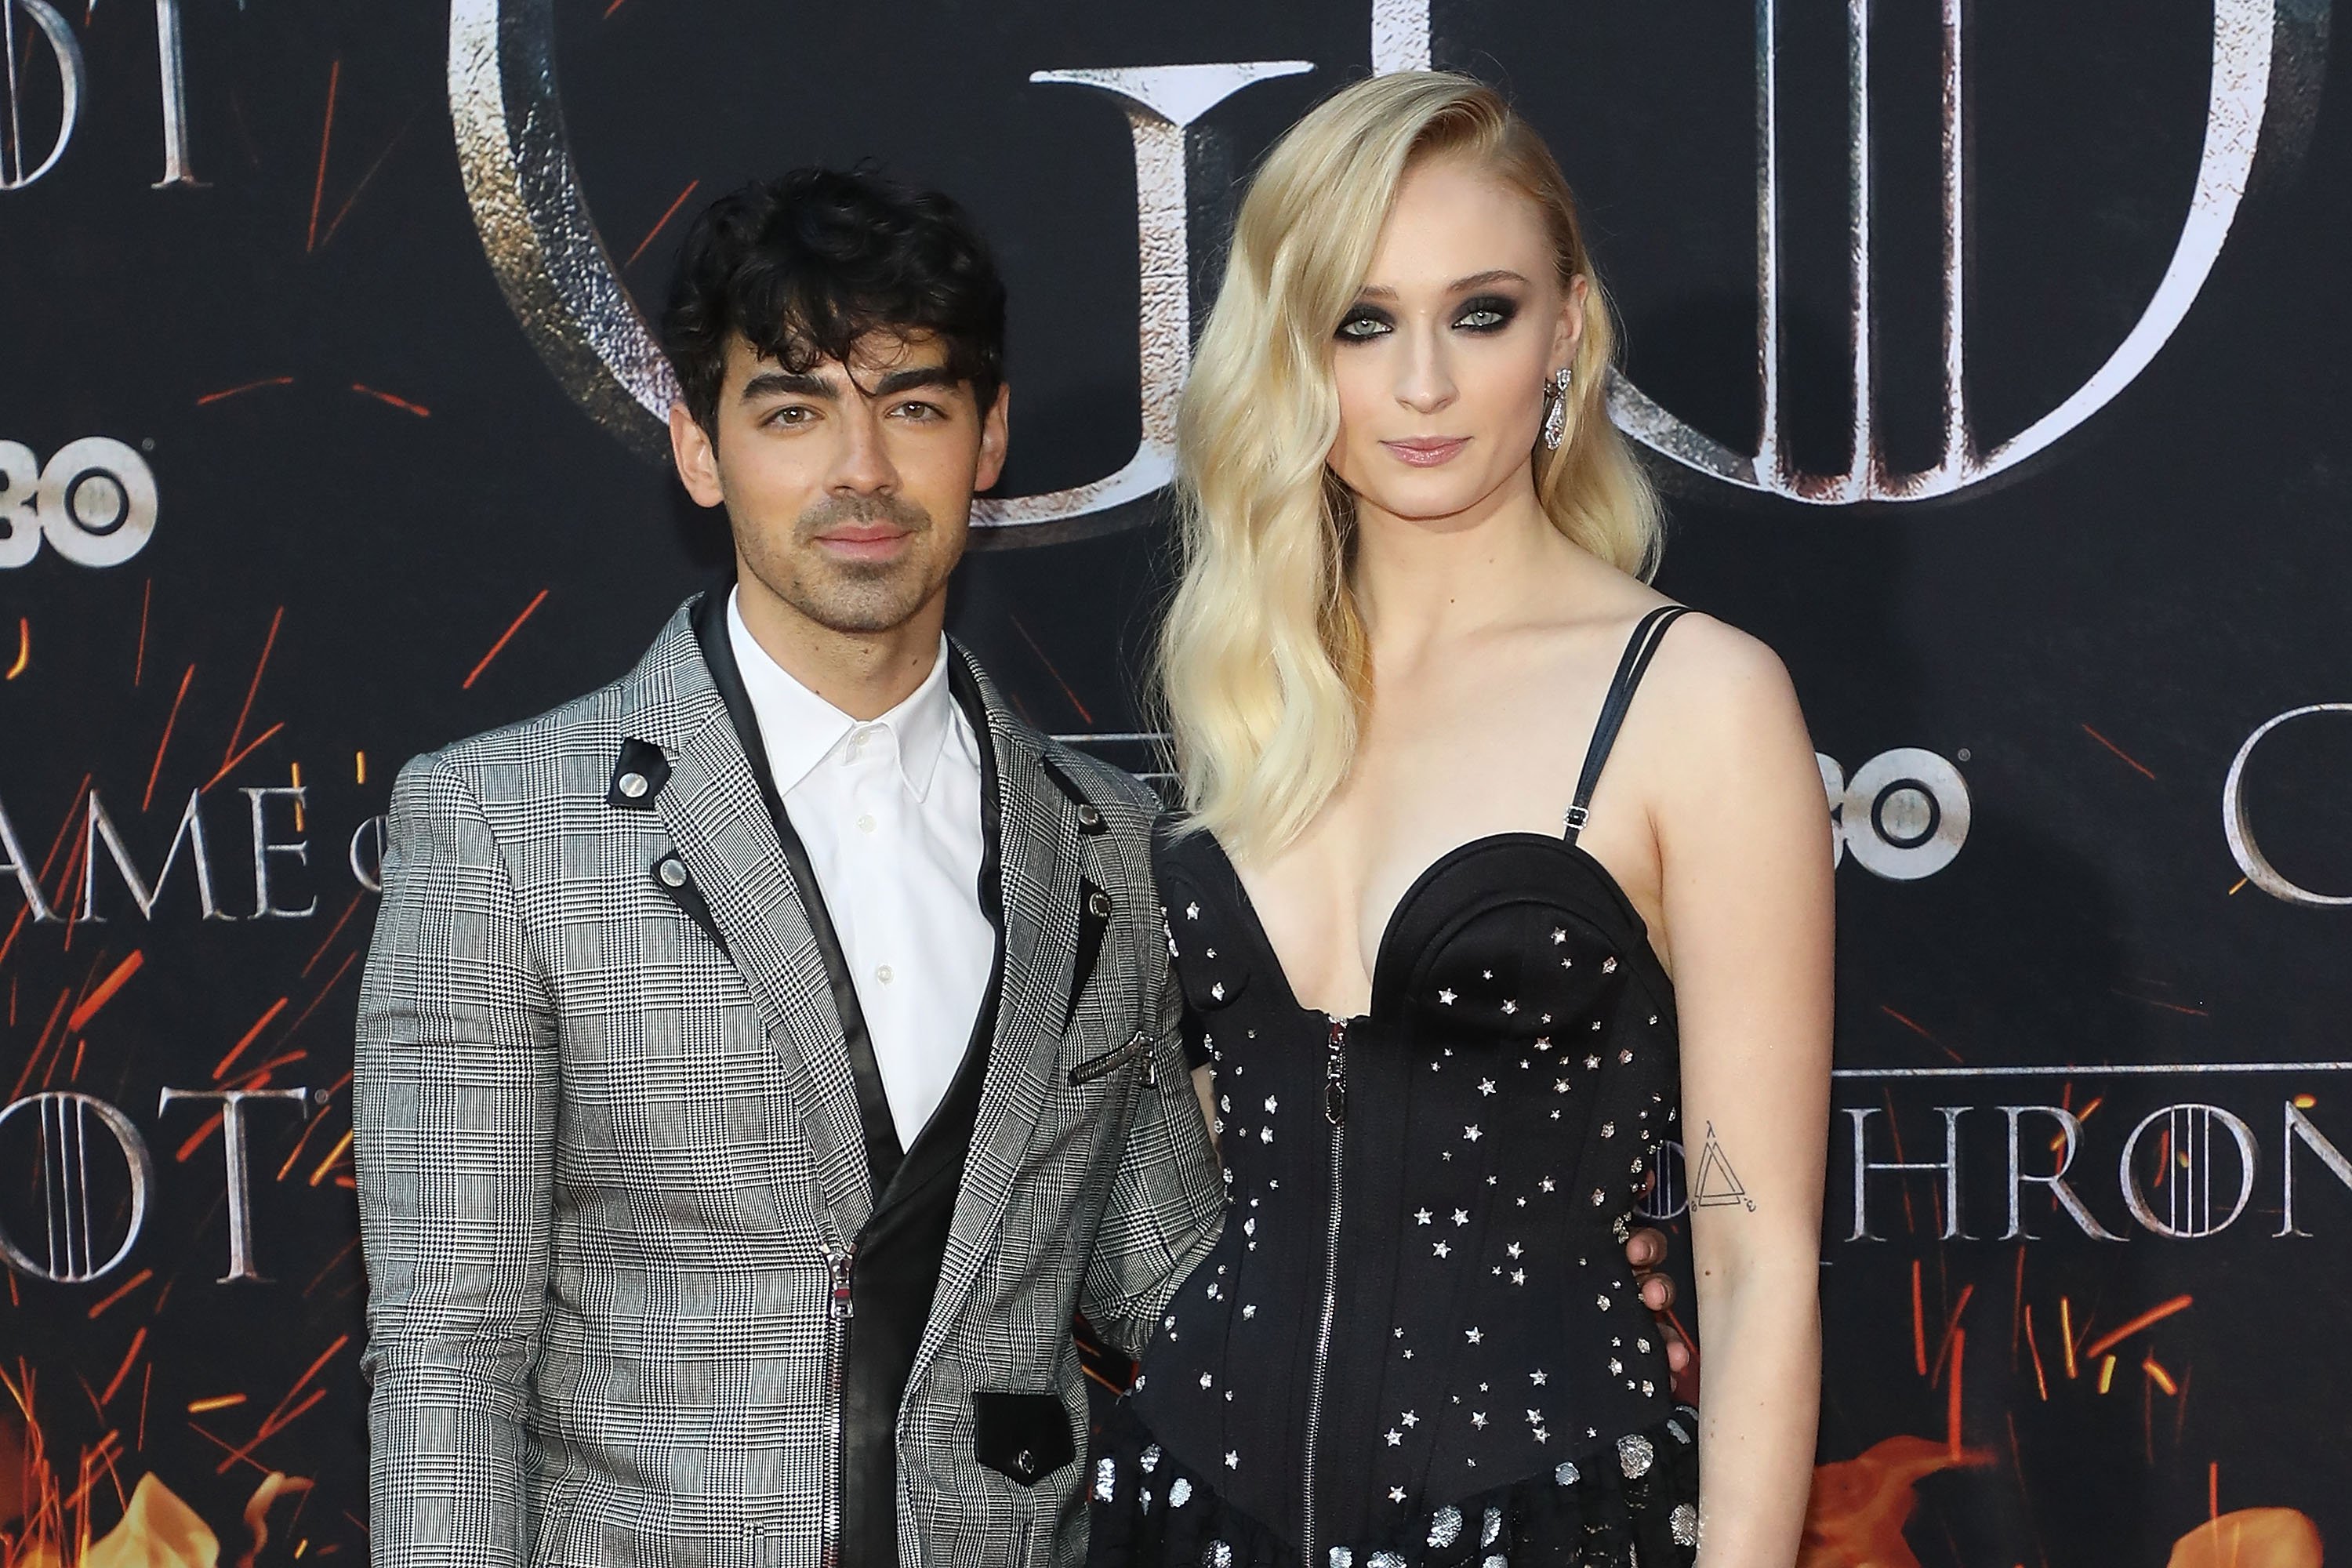 Joe Jonas and Sophie Turner attend the Season 8 premiere of 'Game of Thrones' on April 3, 2019 in New York City.